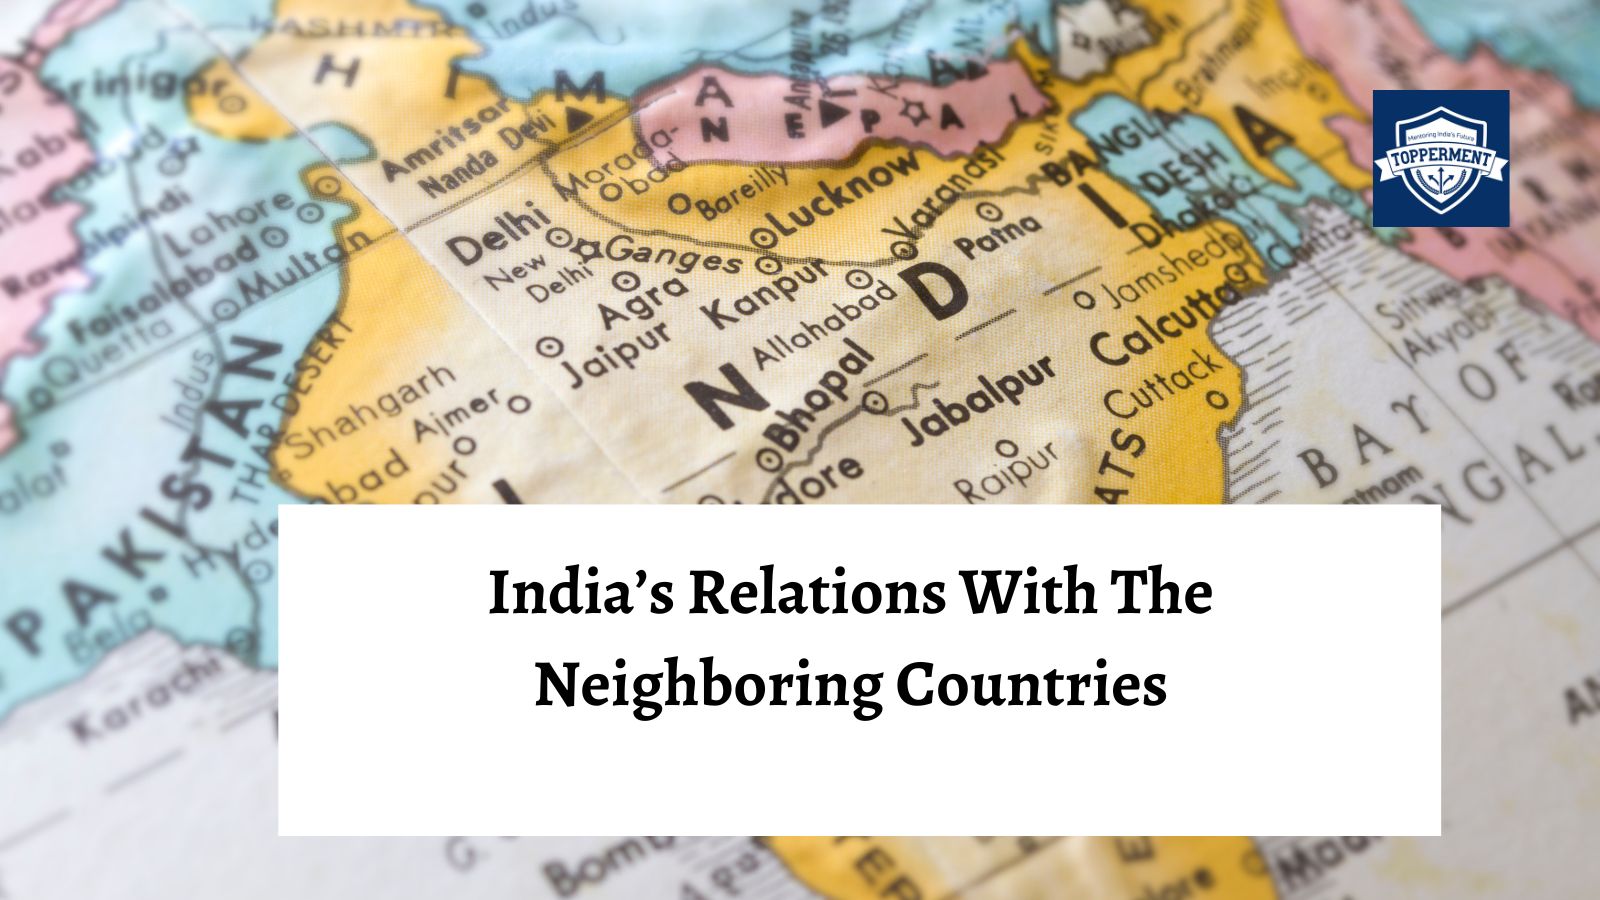 India's relations with the neighboring countries-TopperMent